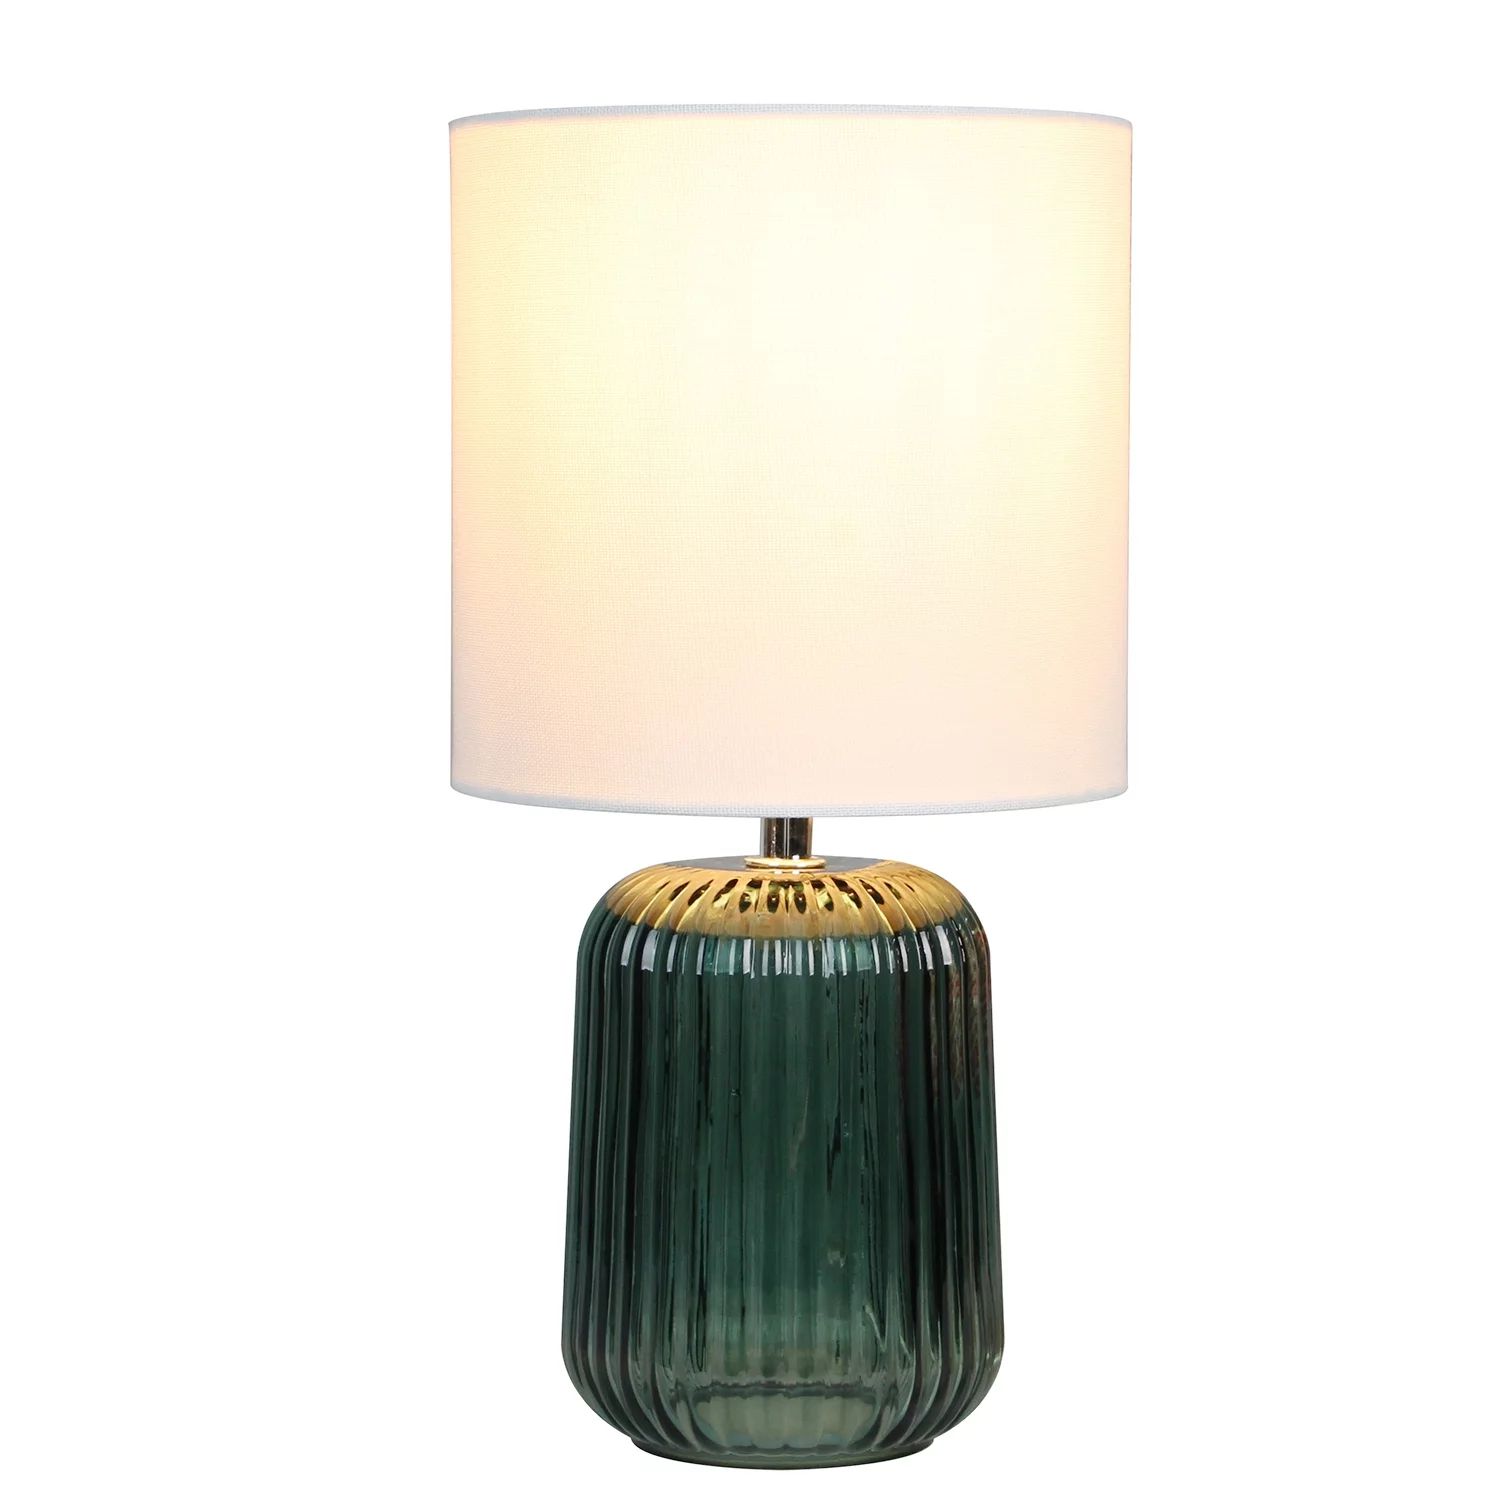 Best seller Mainstays Mainstays 12.75"H Mini Green Glass Stripe Table Lamp with White Lamp Shade ... | Walmart (US)